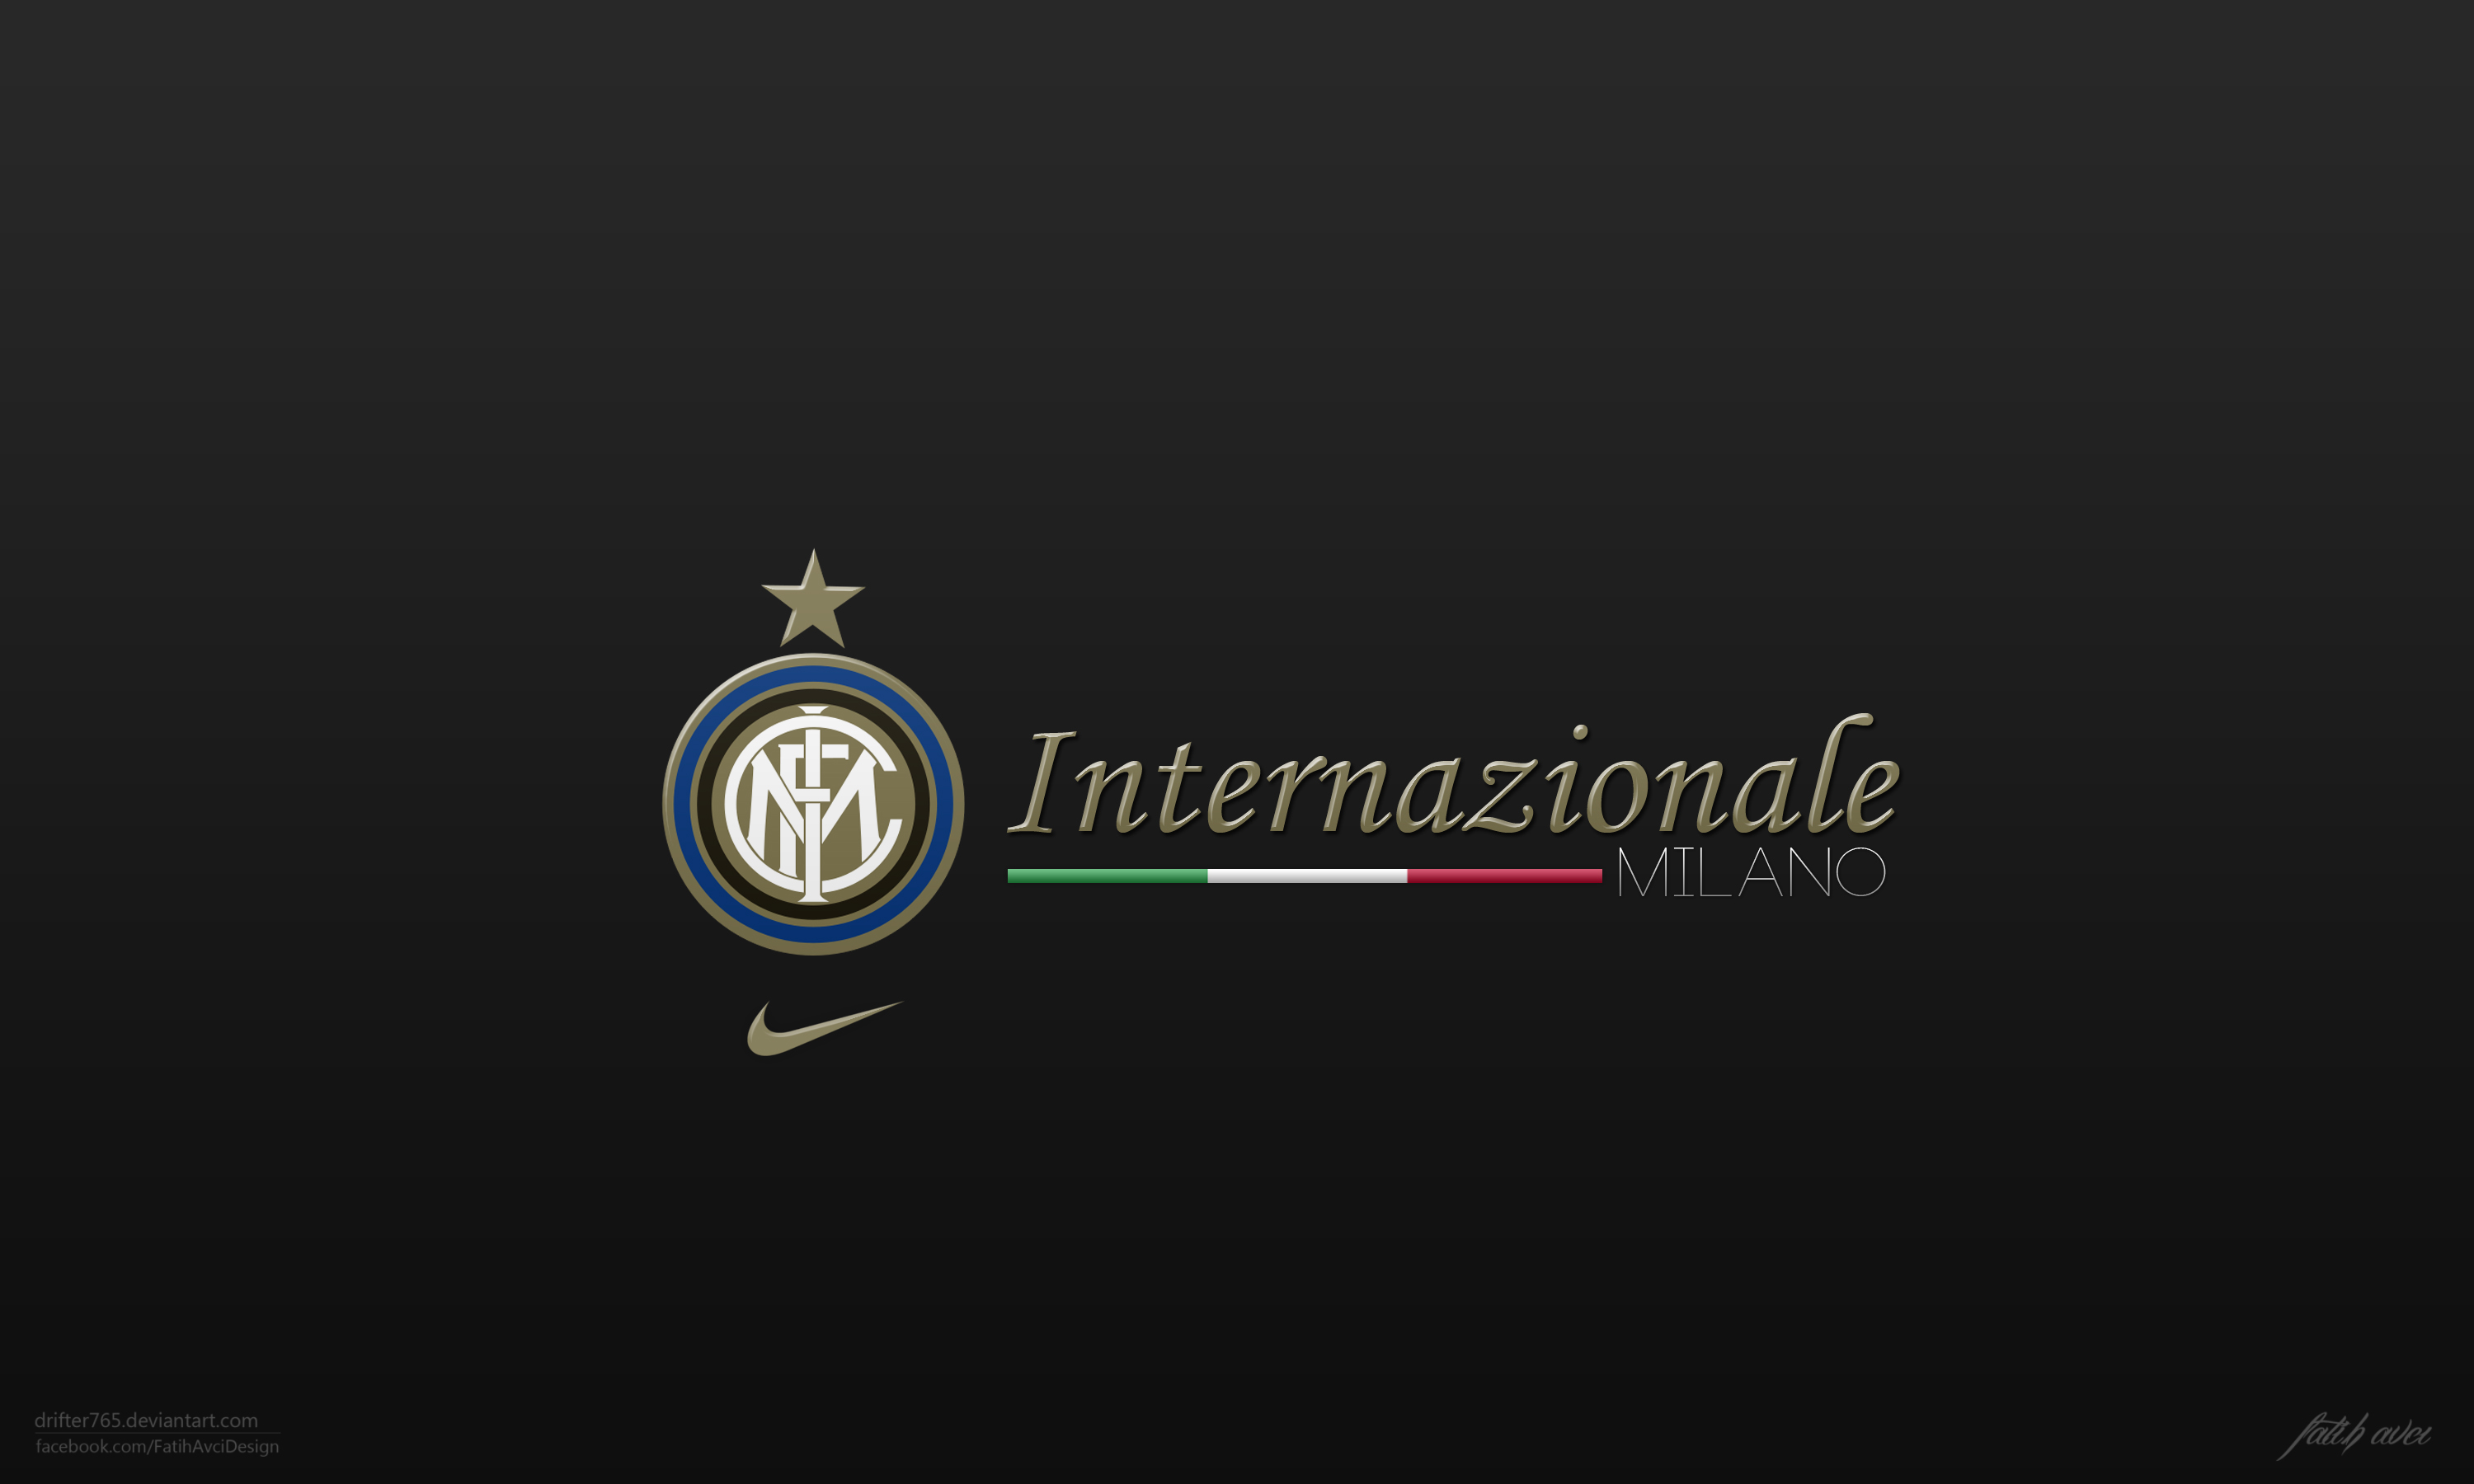 Inter Milan Wallpaper Logo Is High Definition You Can